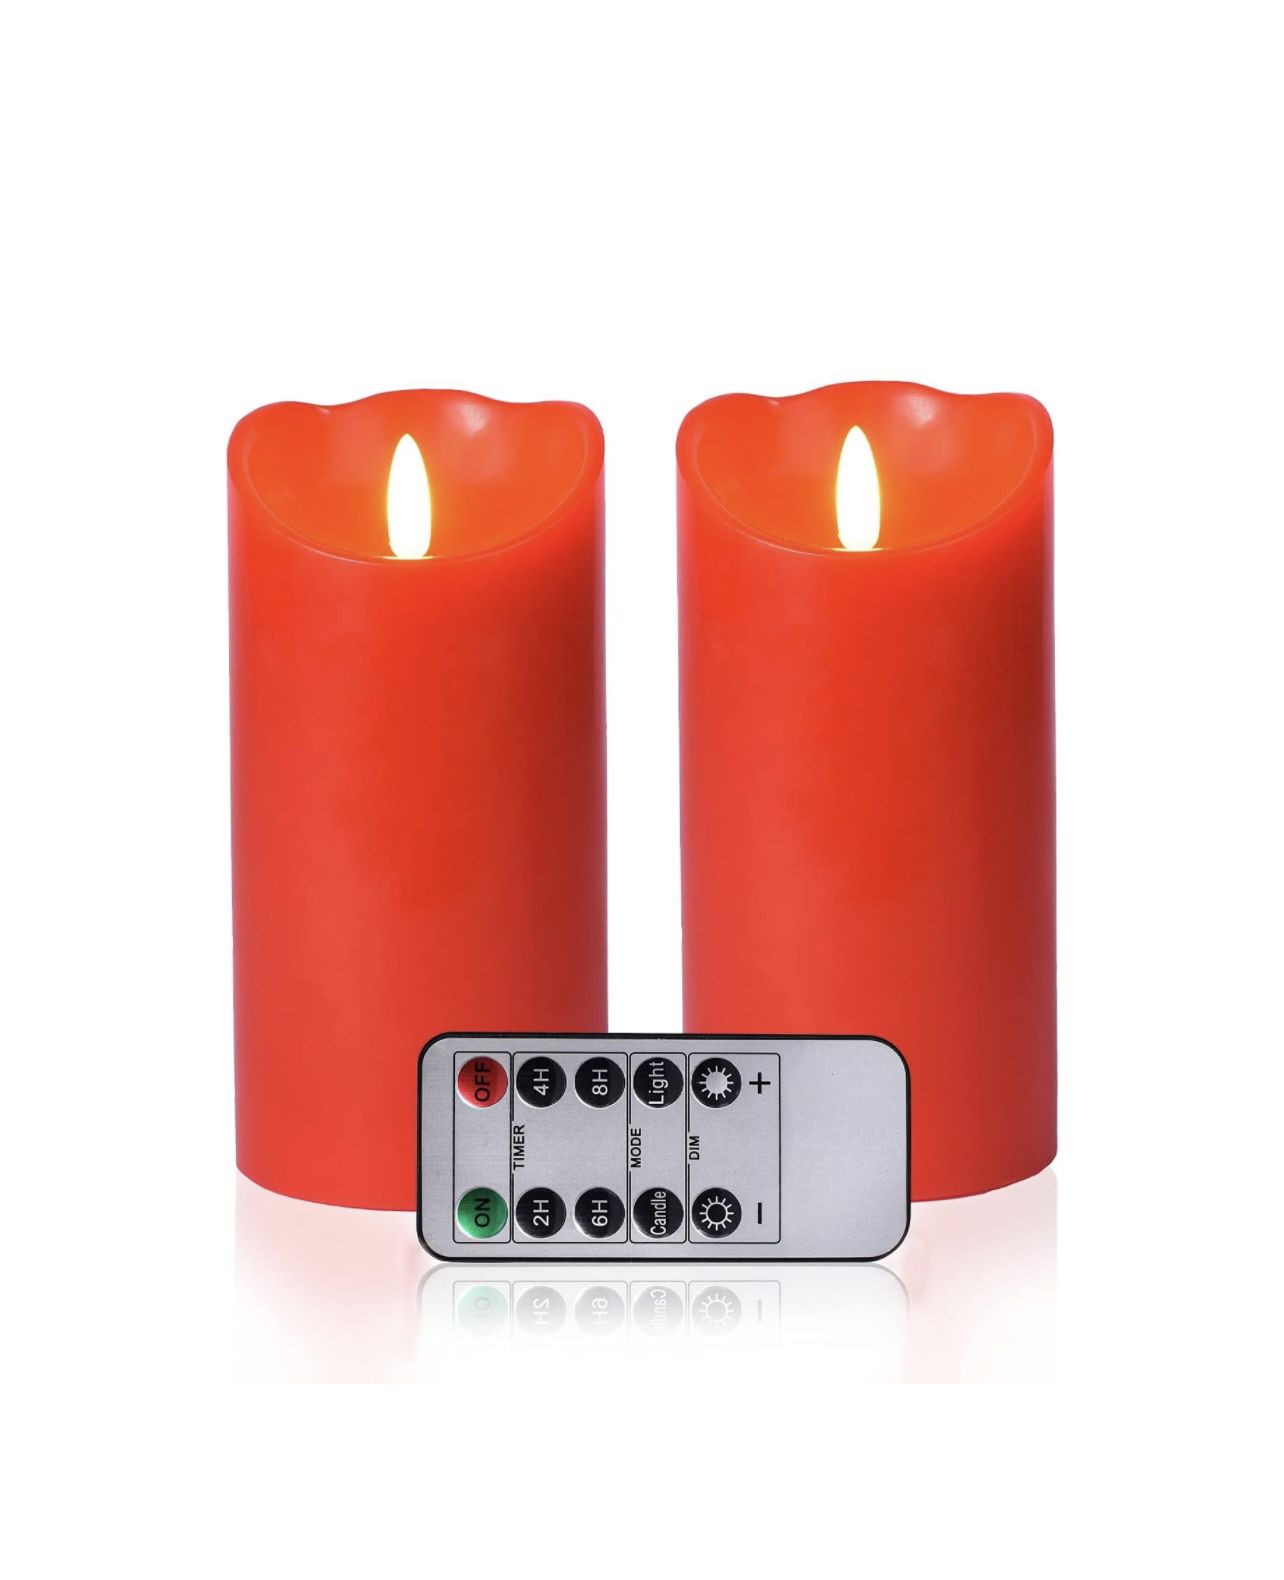 MYCHUJIAN Red Flameless Candles 2 Piece Set(D 3" x H 6") Flickering Flame Effect, LED Pillar Candles Battery Operated Real Wax, with 10-Key Remote Con